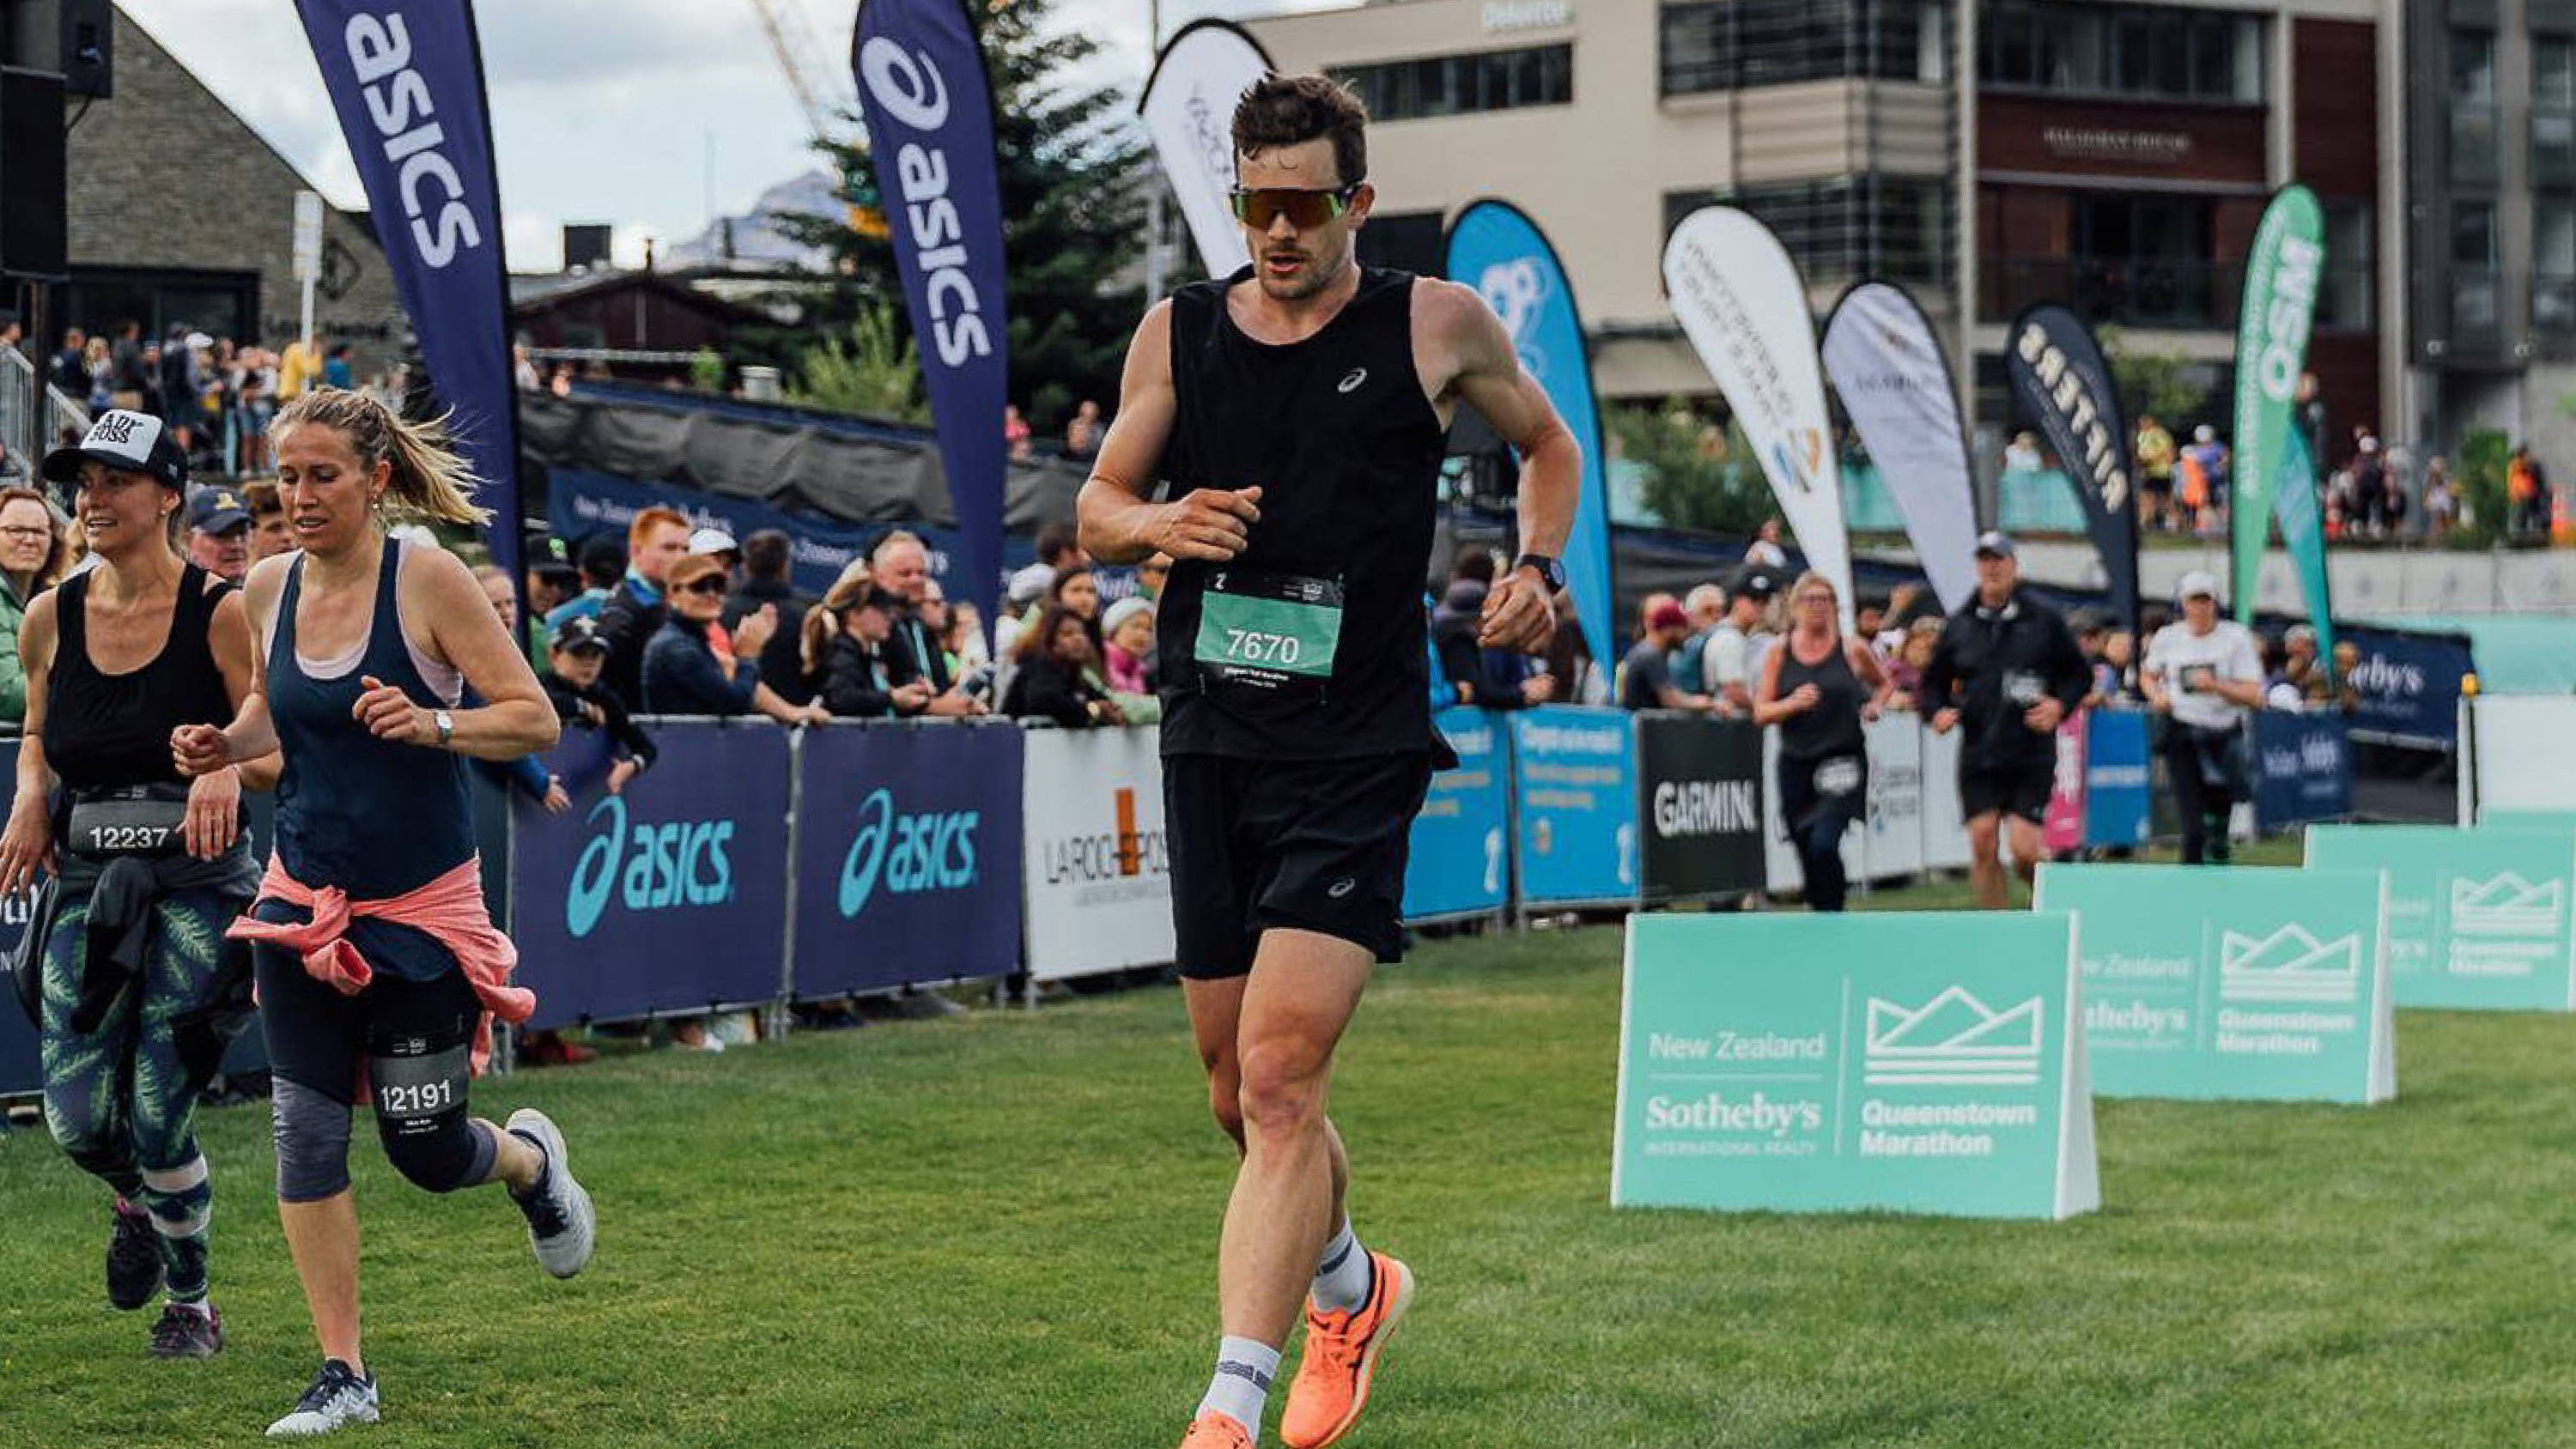 Mike Phillips crossing the finish line of the Queenstown Marathon